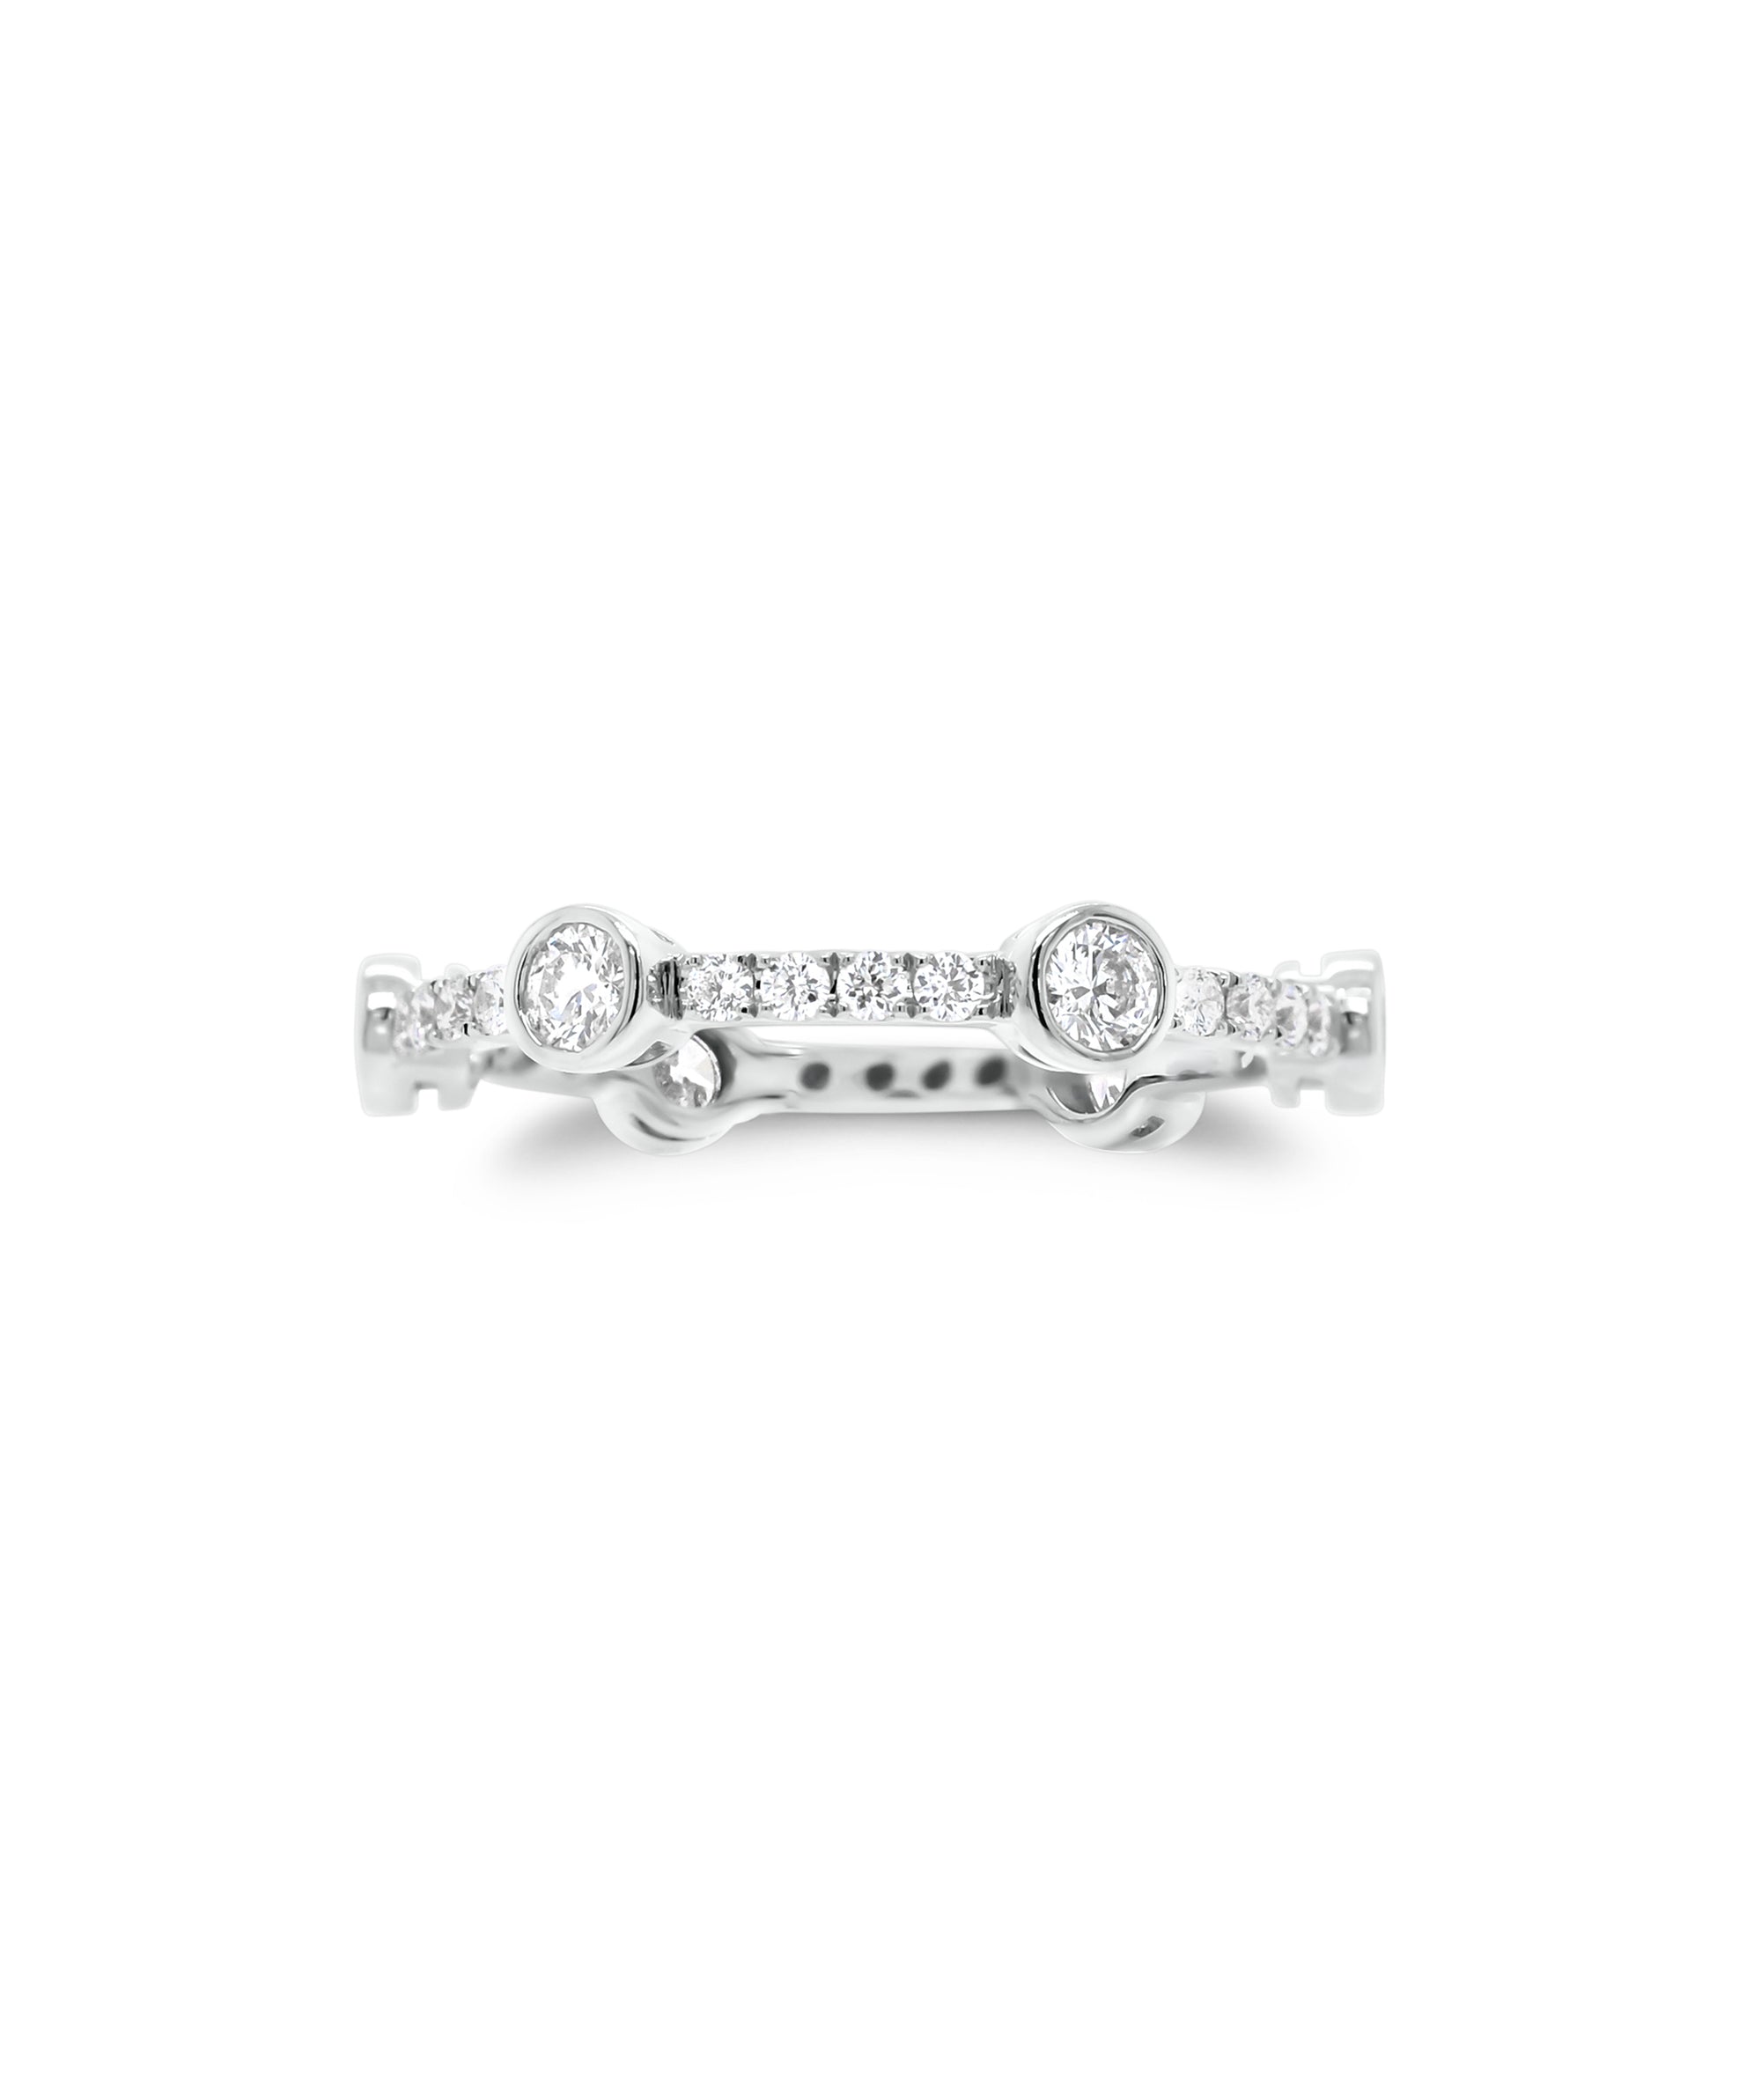 Diamond Bezels Stackable Ring  - 14K gold weighing 1.90 grams  - 30 round diamonds totaling 0.76 carats